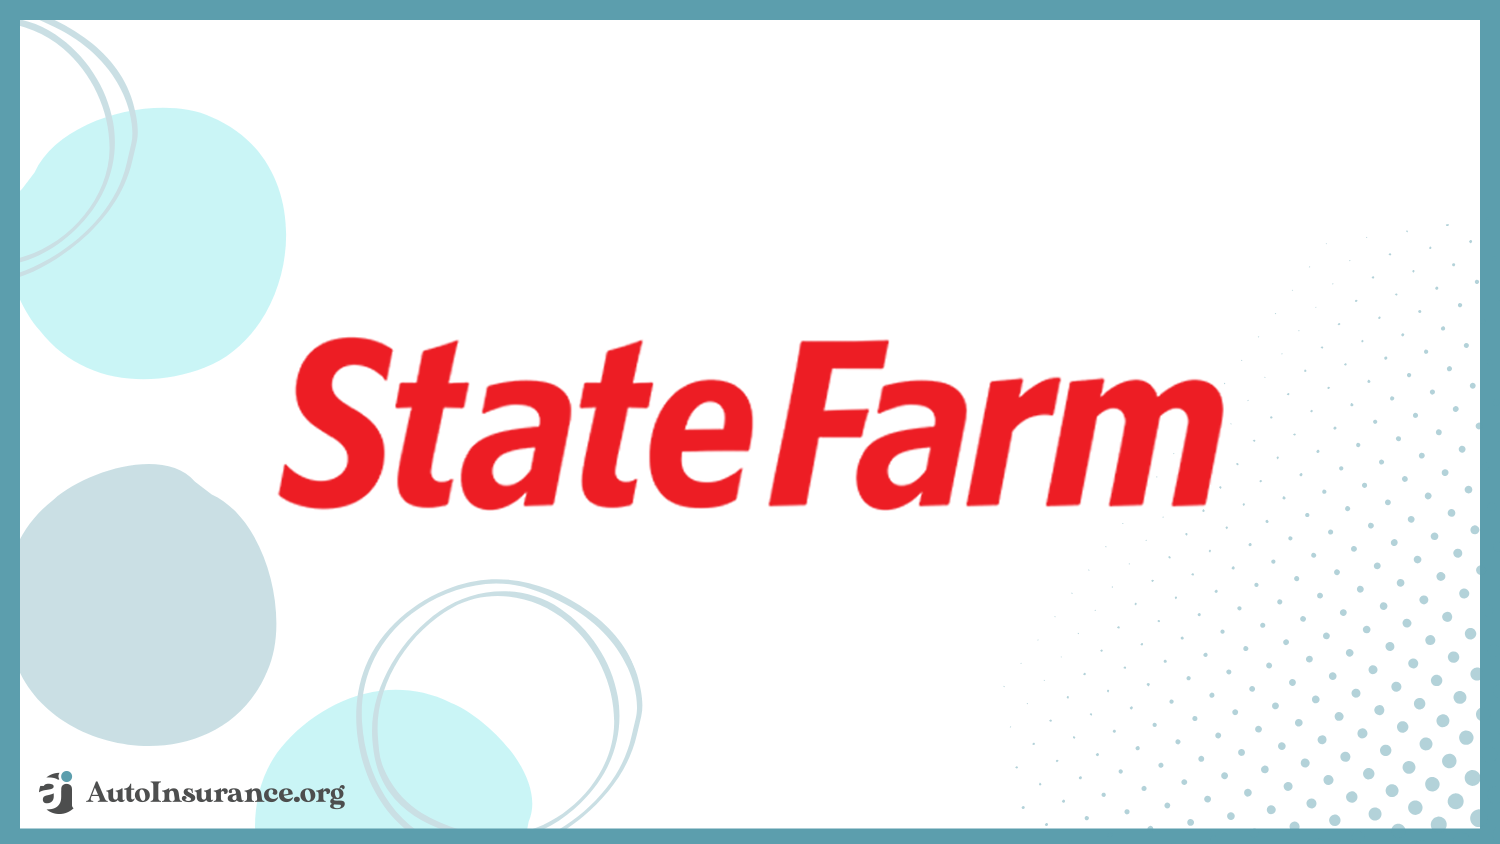 State Farm best companies for bundling home and auto insurance 